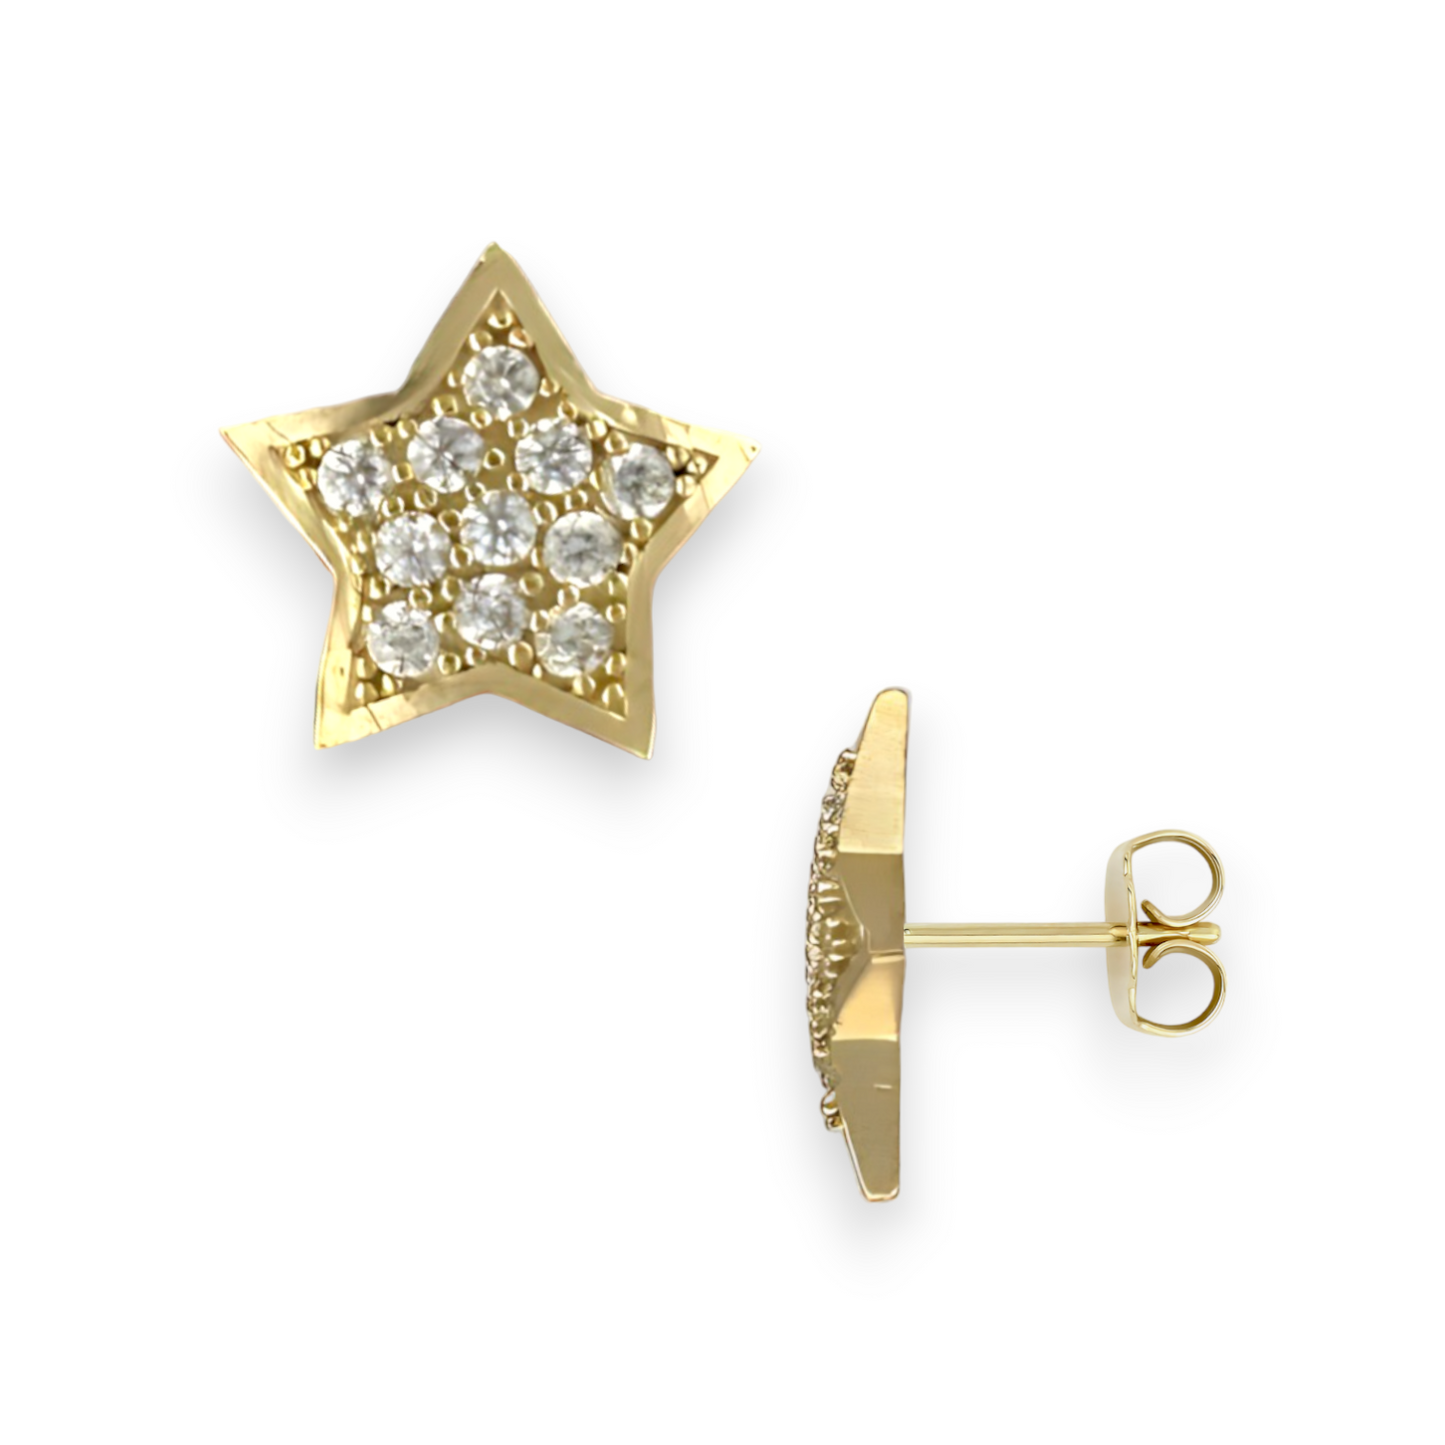 Yellow Gold CZ Round Cut Mico-Pave Star Stud Earrings - 10k Yellow Gold